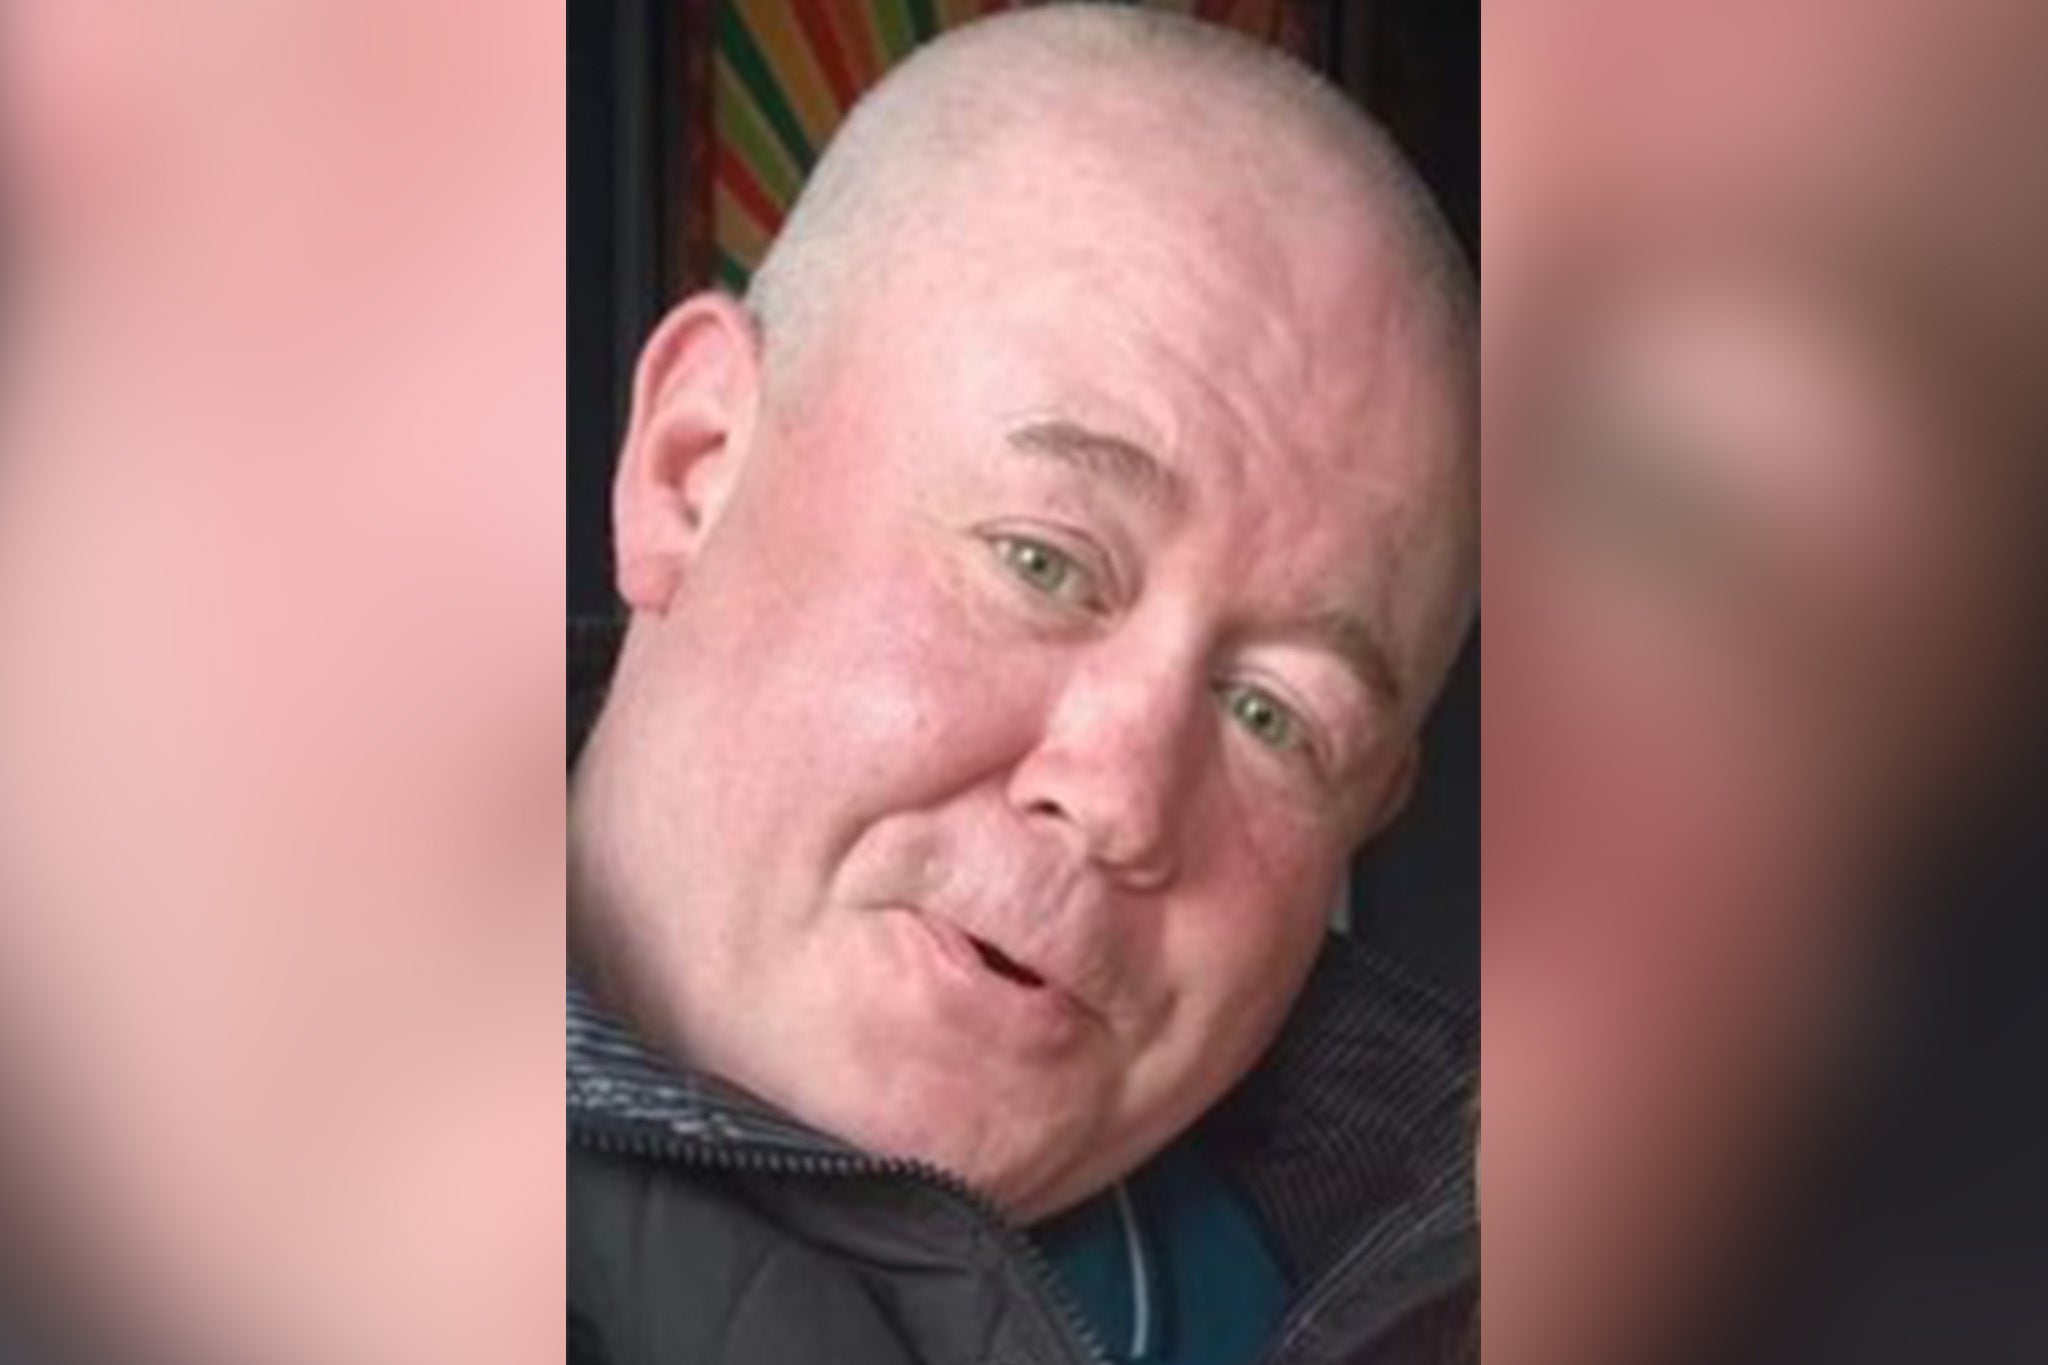 The family of Anthony Harley watched as the machines keeping alive the 53-year-old were turned off following the attack in Blackpool in February